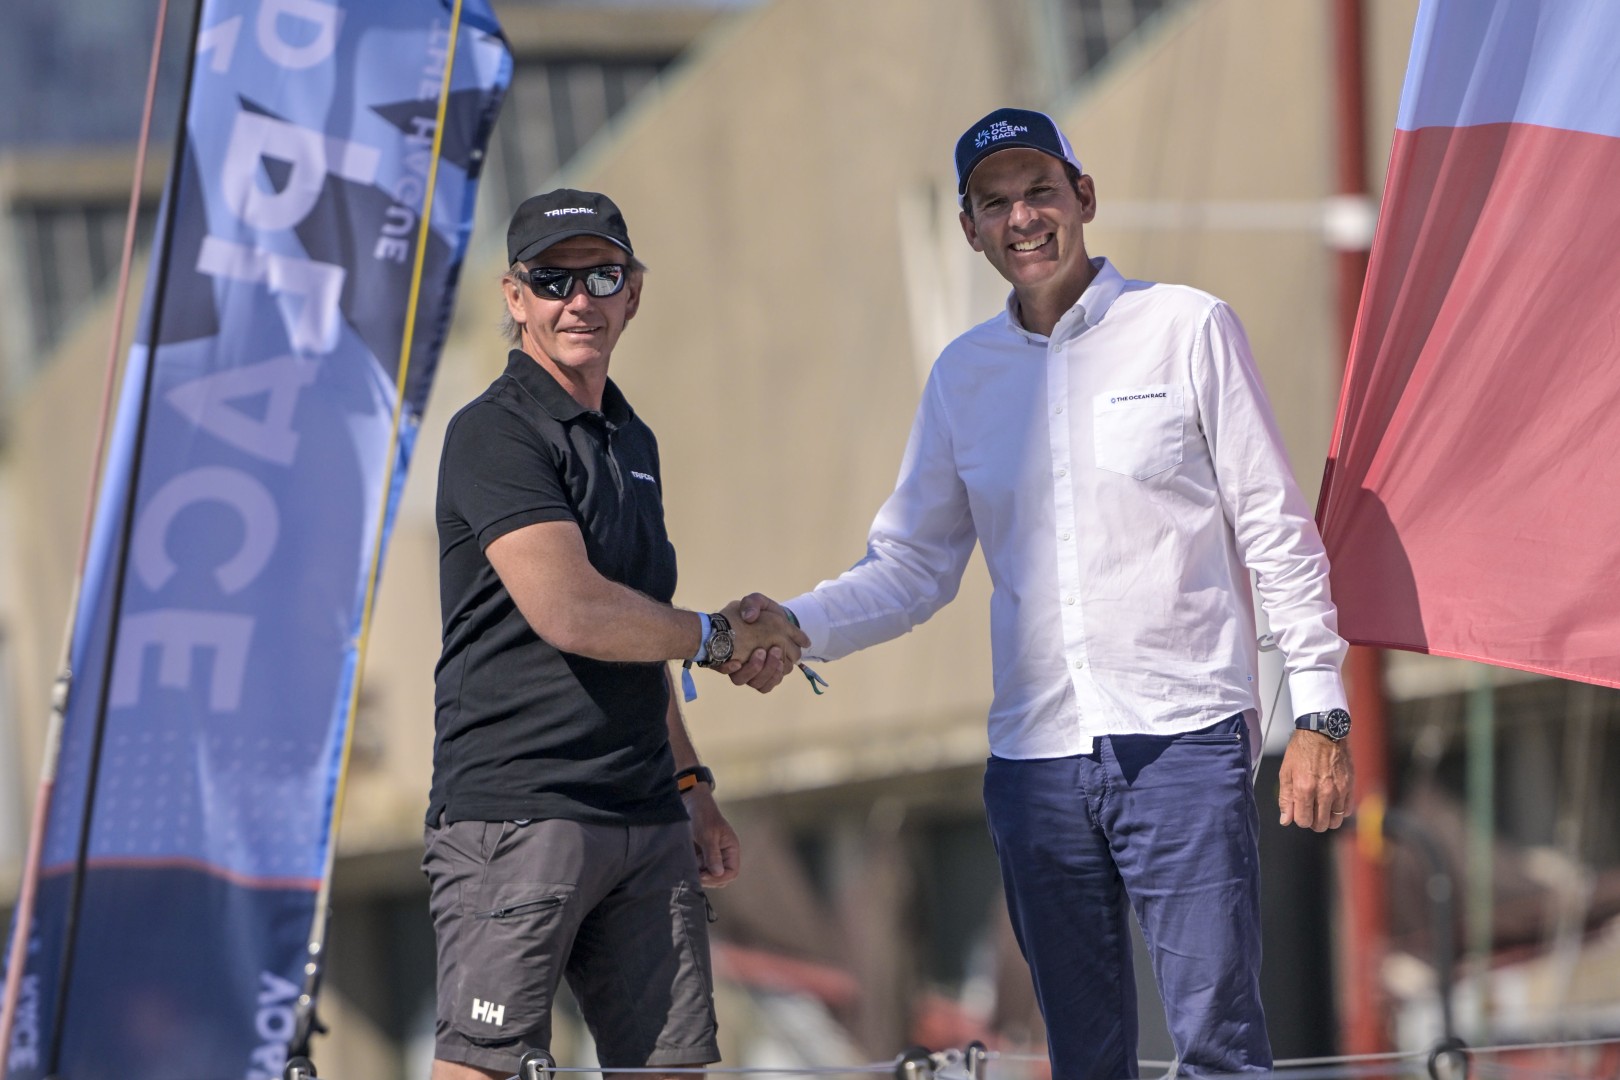 The Ocean Race. CEO of the Trifork group, Jørn Larsen with The Ocean Race Chairman Richard Brisius in The Hague, Netherlands. © Sailing Energy / The Ocean Race